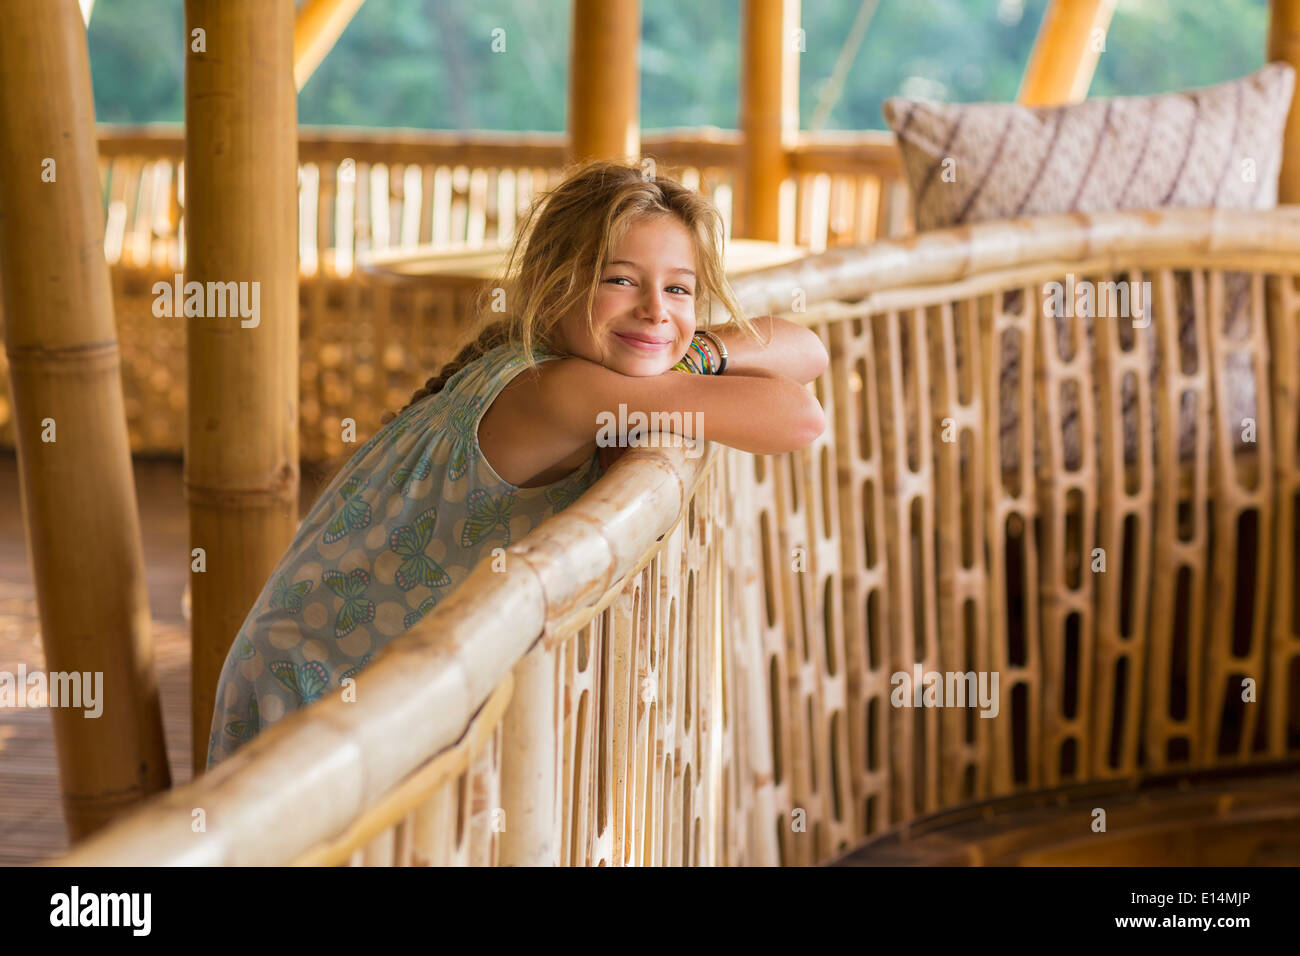 Caucasian girl leaning over railing Banque D'Images